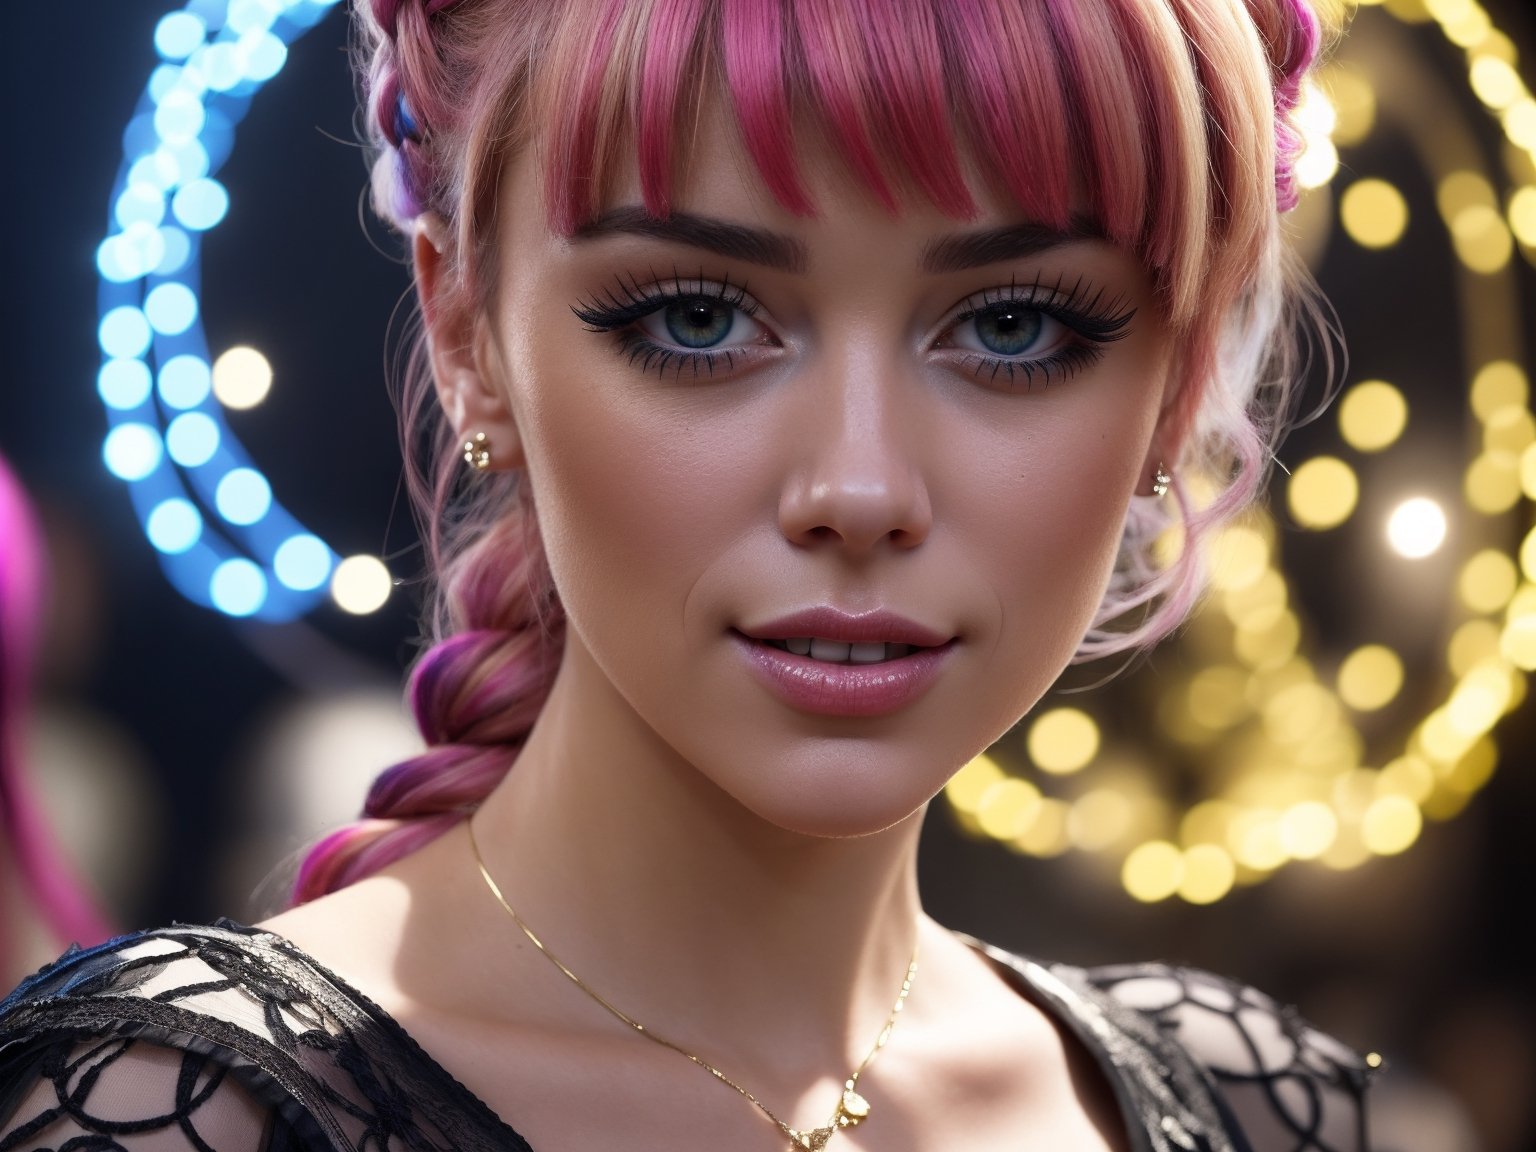 photorealistic, intricate, ((quality)), 8k, (UHD:1.23), a ((beautiful)) colombian, 23 y.o., natural face, ((eyelashes)), fractal embroidery, sexy maid, latex laces, asymmetric_bangs, shiny lips, ((cleavage)), ((perfect teeth)), pink_hair blonde, wavy_hair, thigh boots, braids, glowing art composition, peacock feathers, resemble Mary Elizabeth Winstead:1.23,